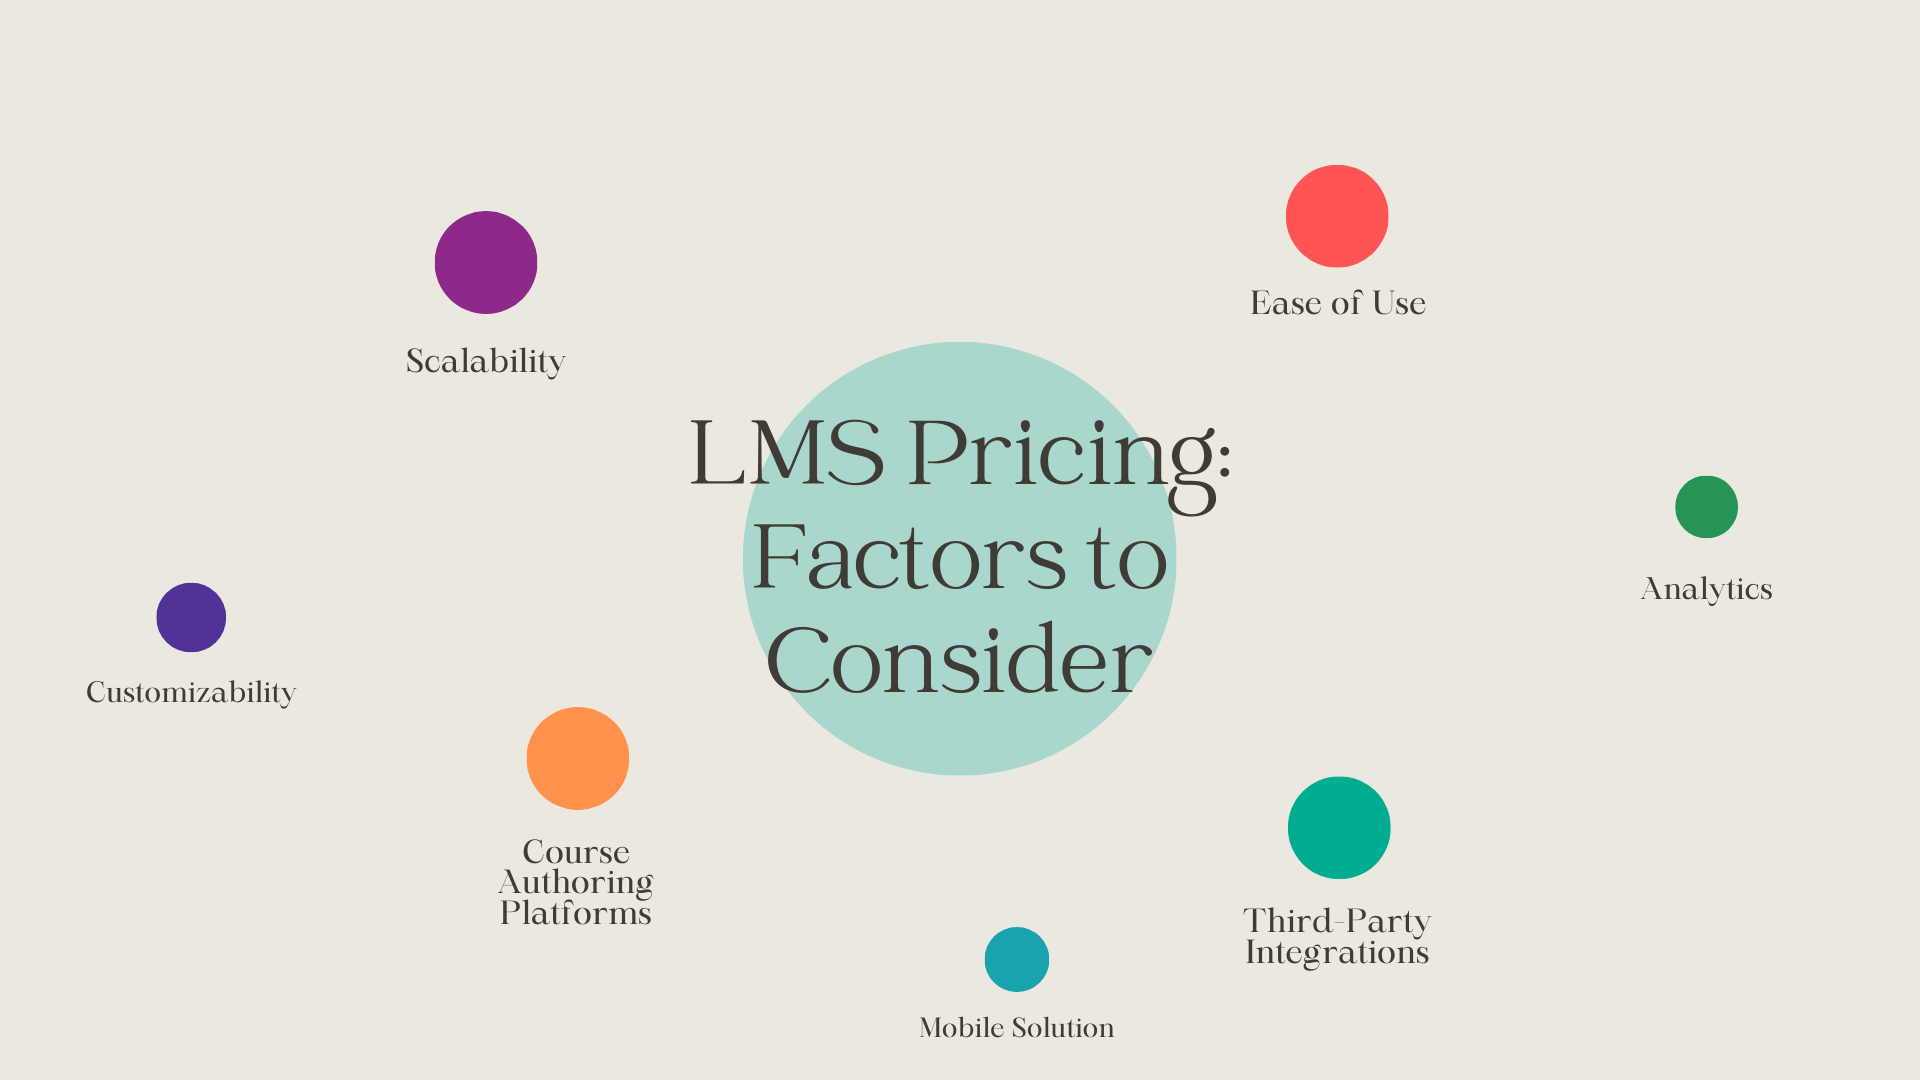 LMS Pricing: Factors to Consider